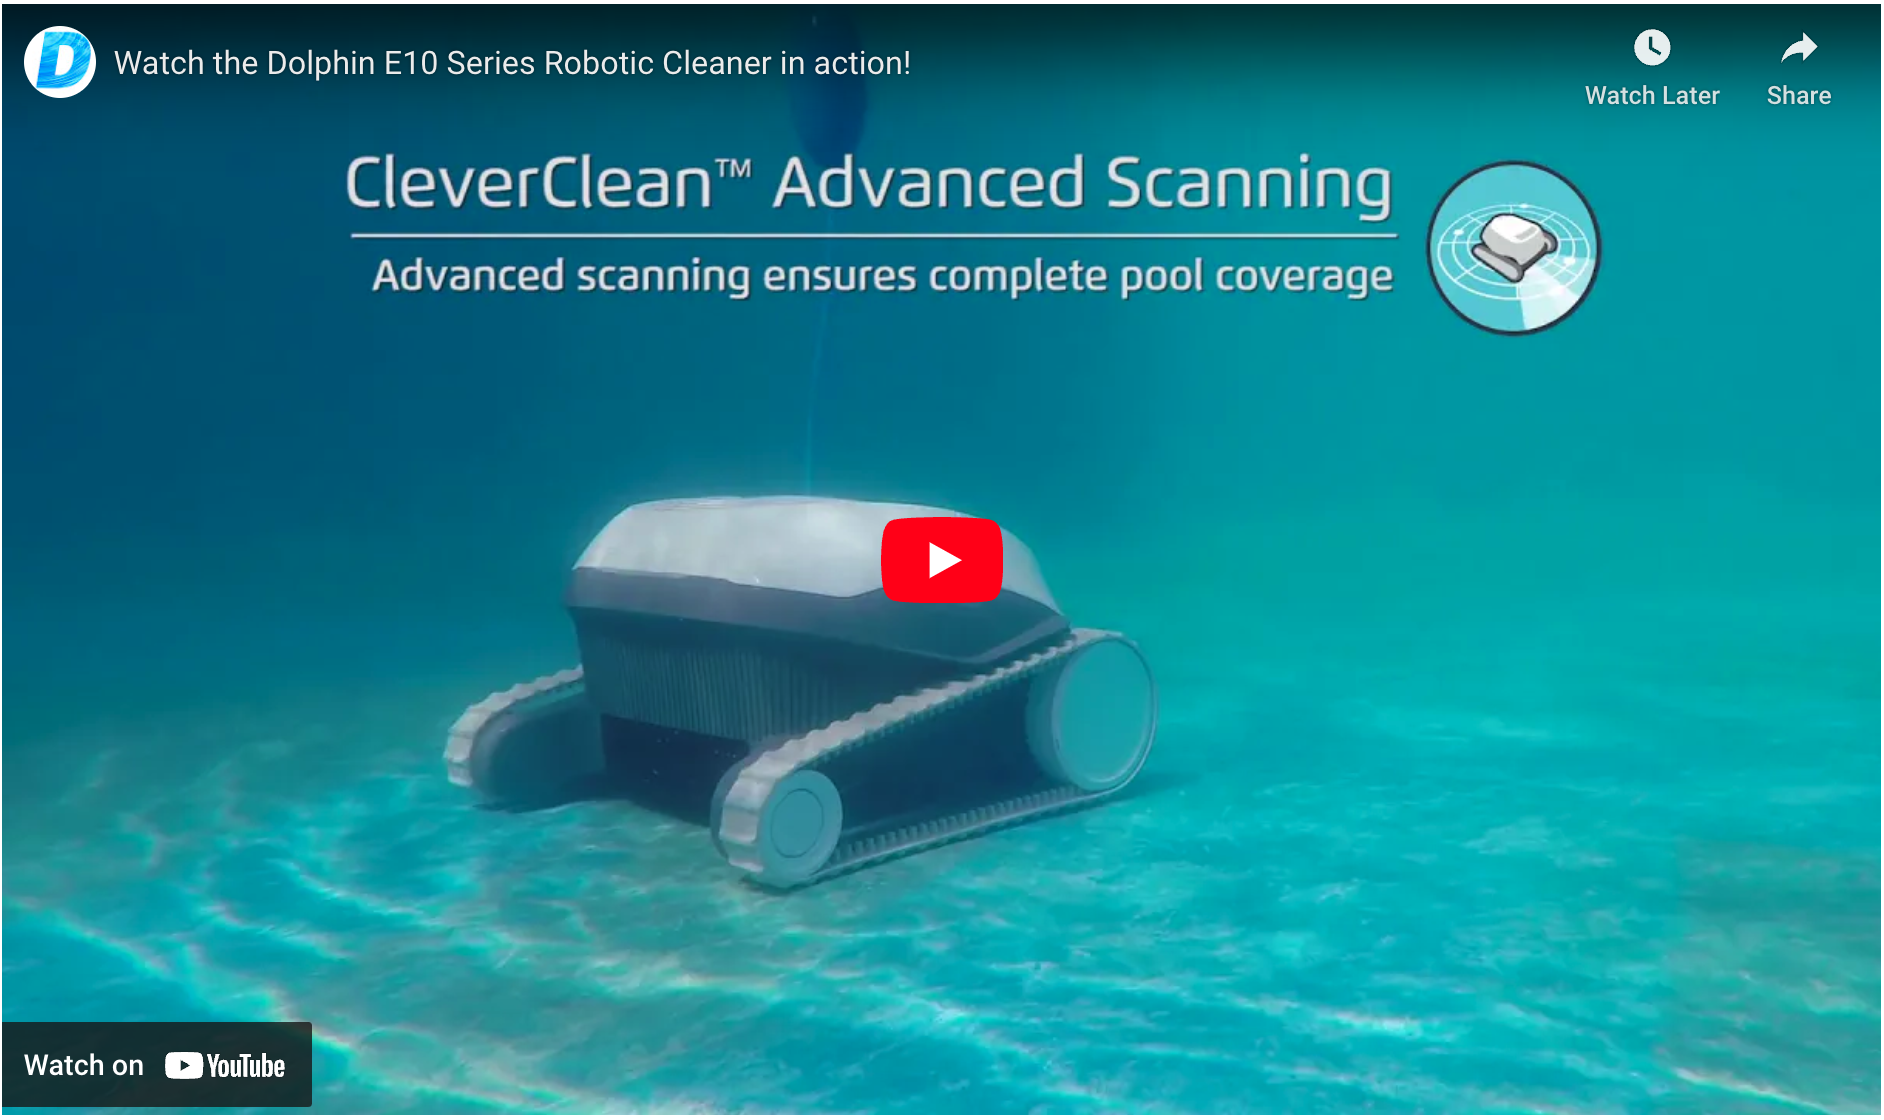 Dolphin E10 Series Above Ground Robotic Cleaner in Action!